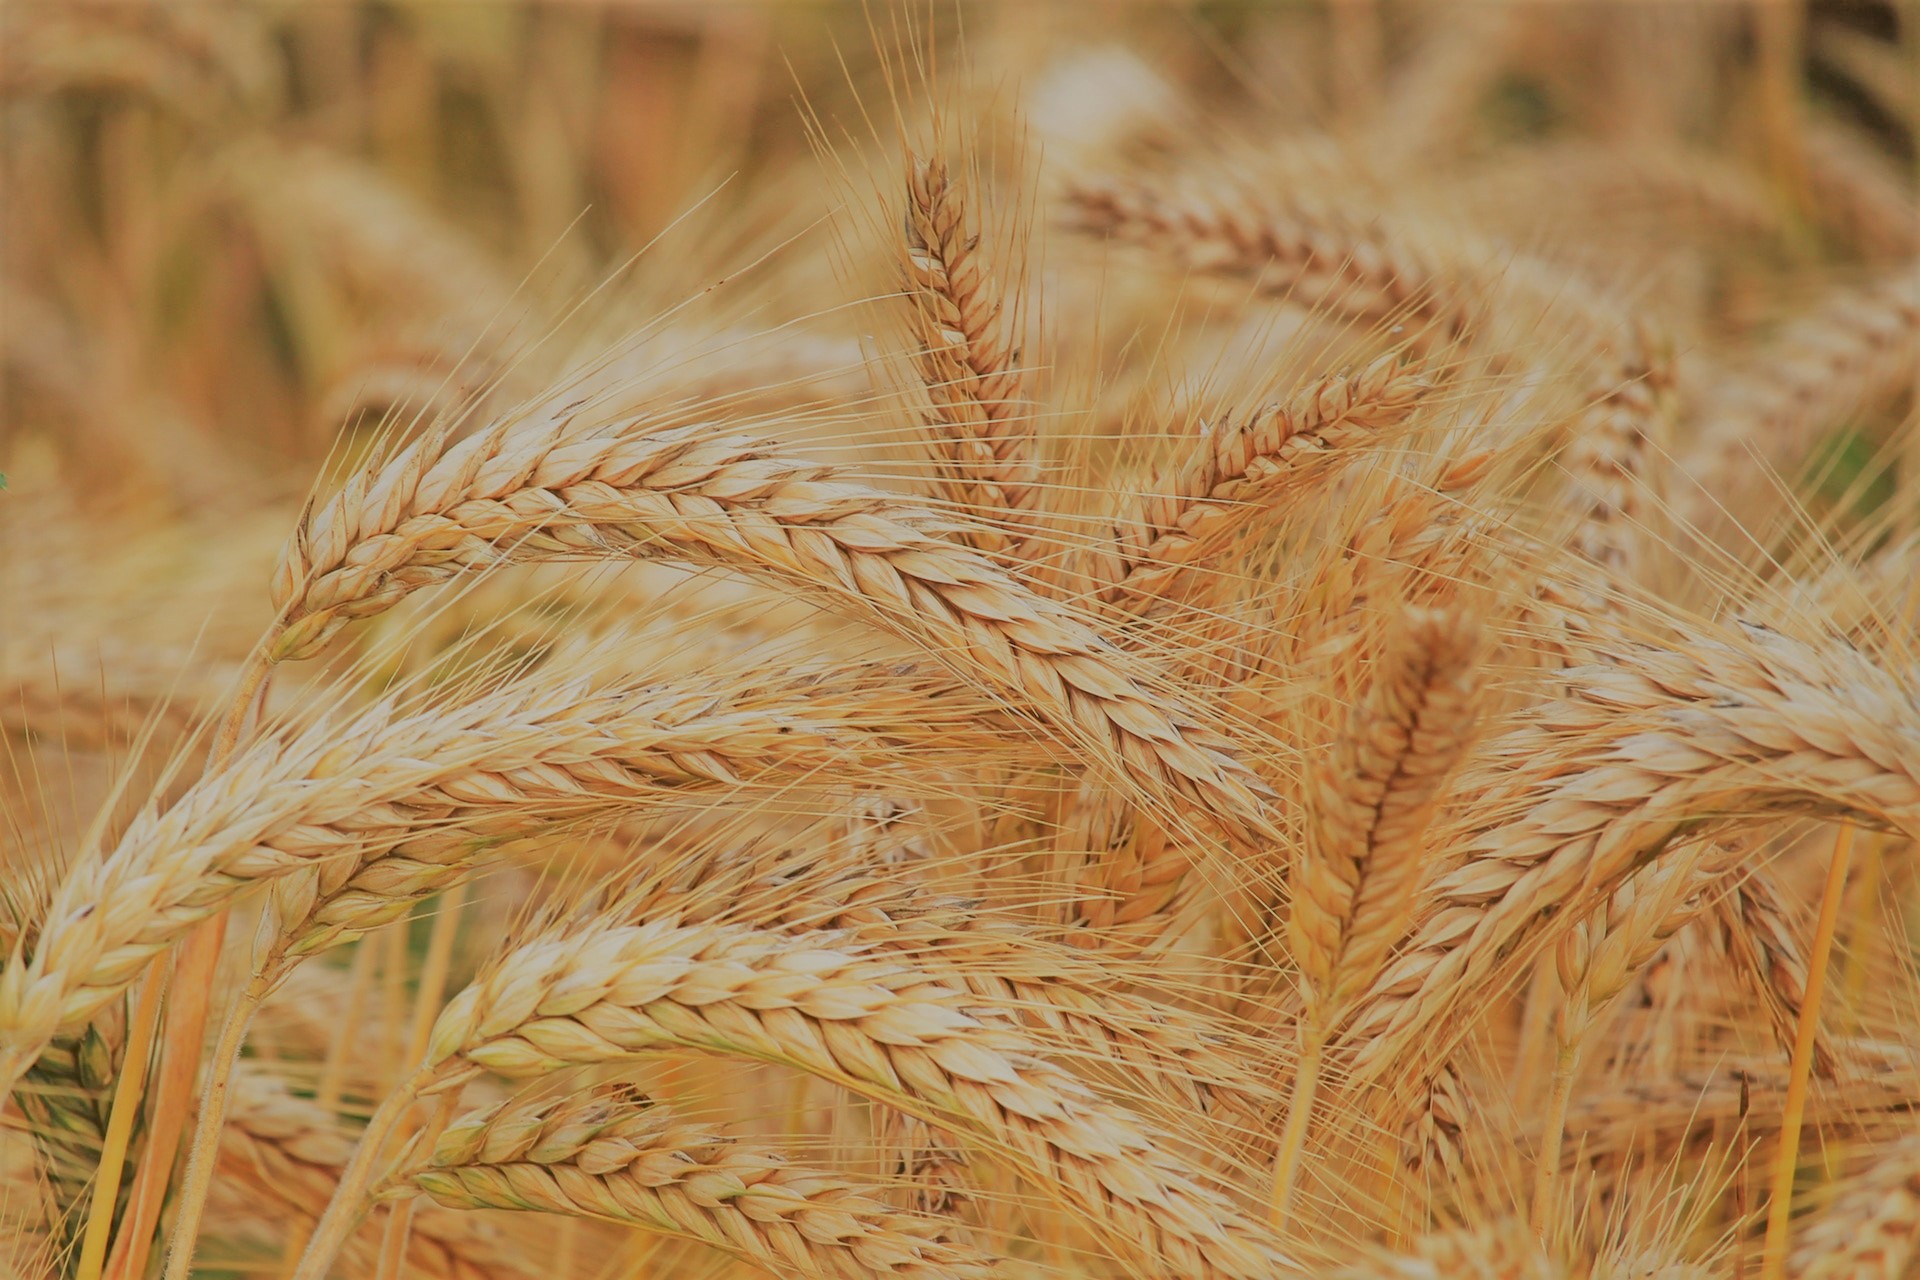 Why we don’t eat wheat